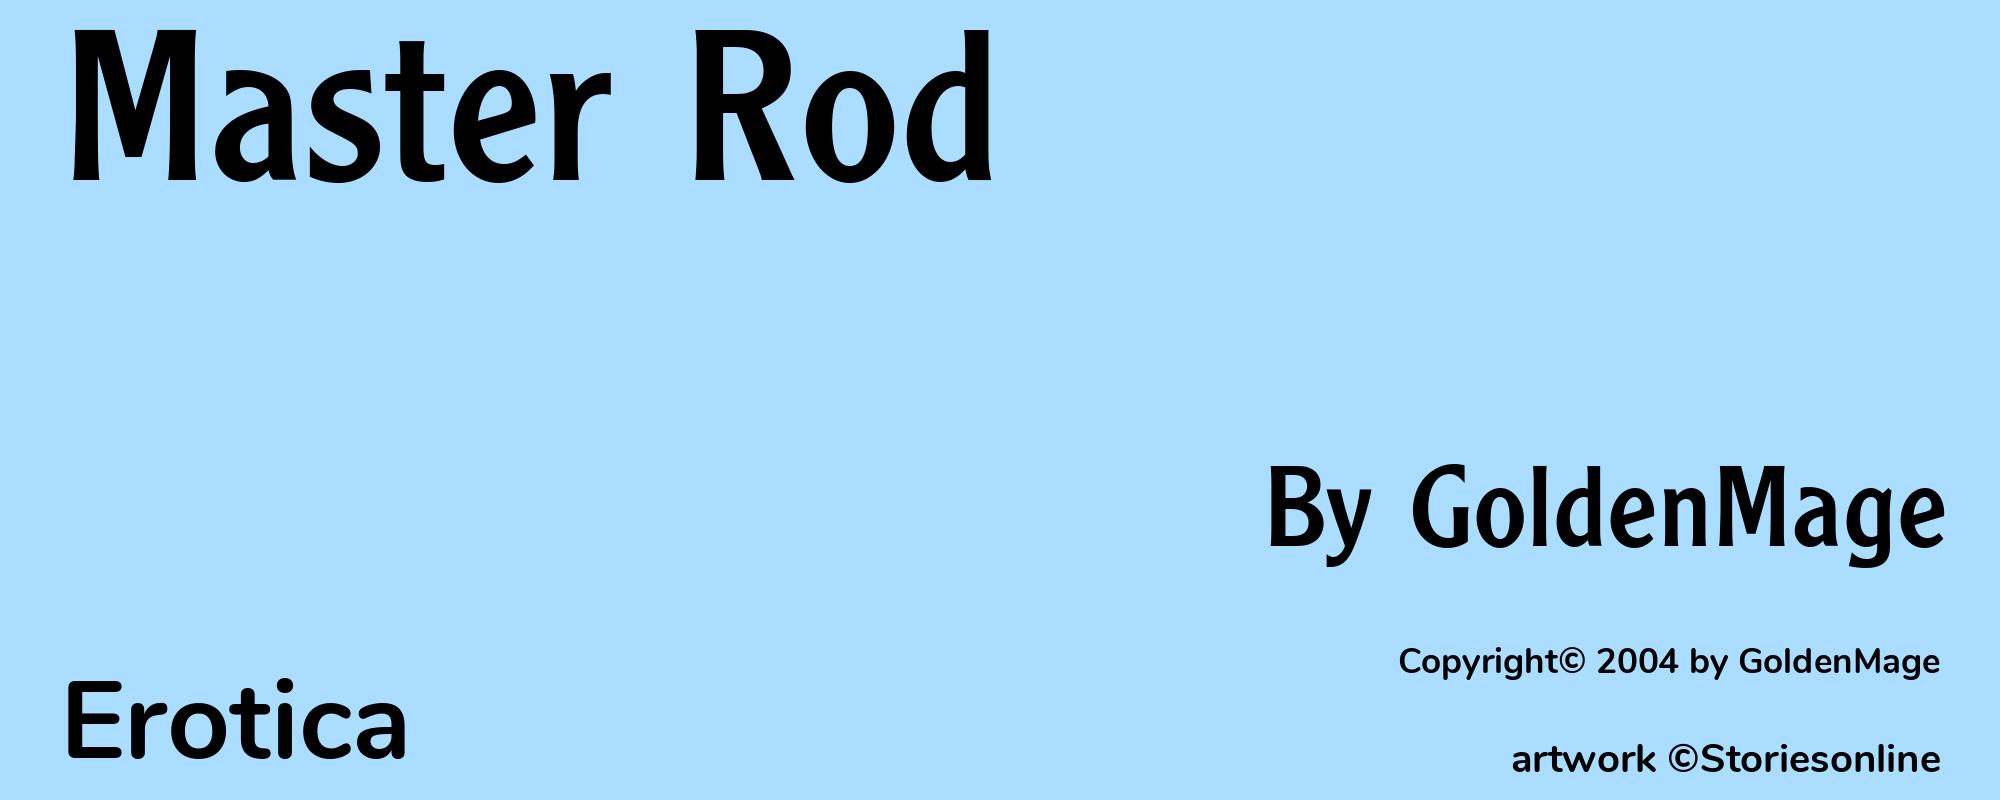 Master Rod - Cover